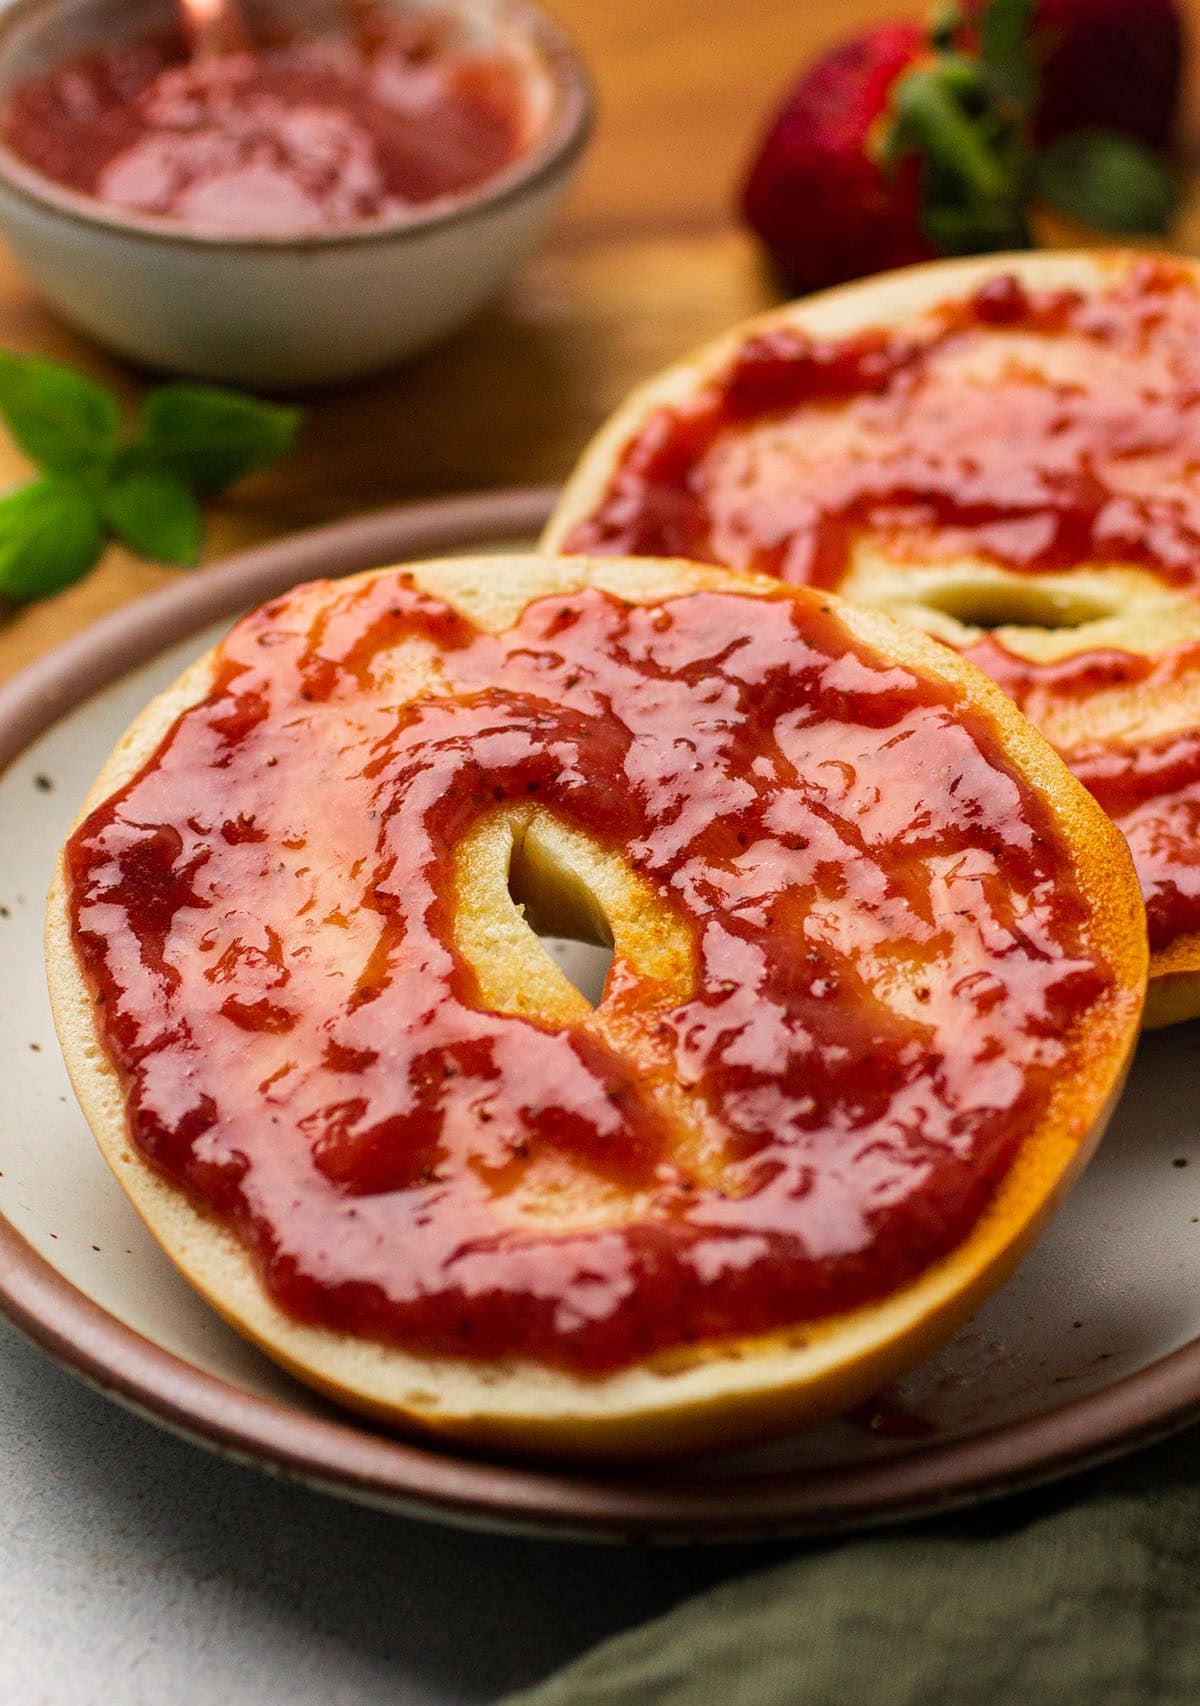 Slow cooker strawberry jam on a toasted bagel.